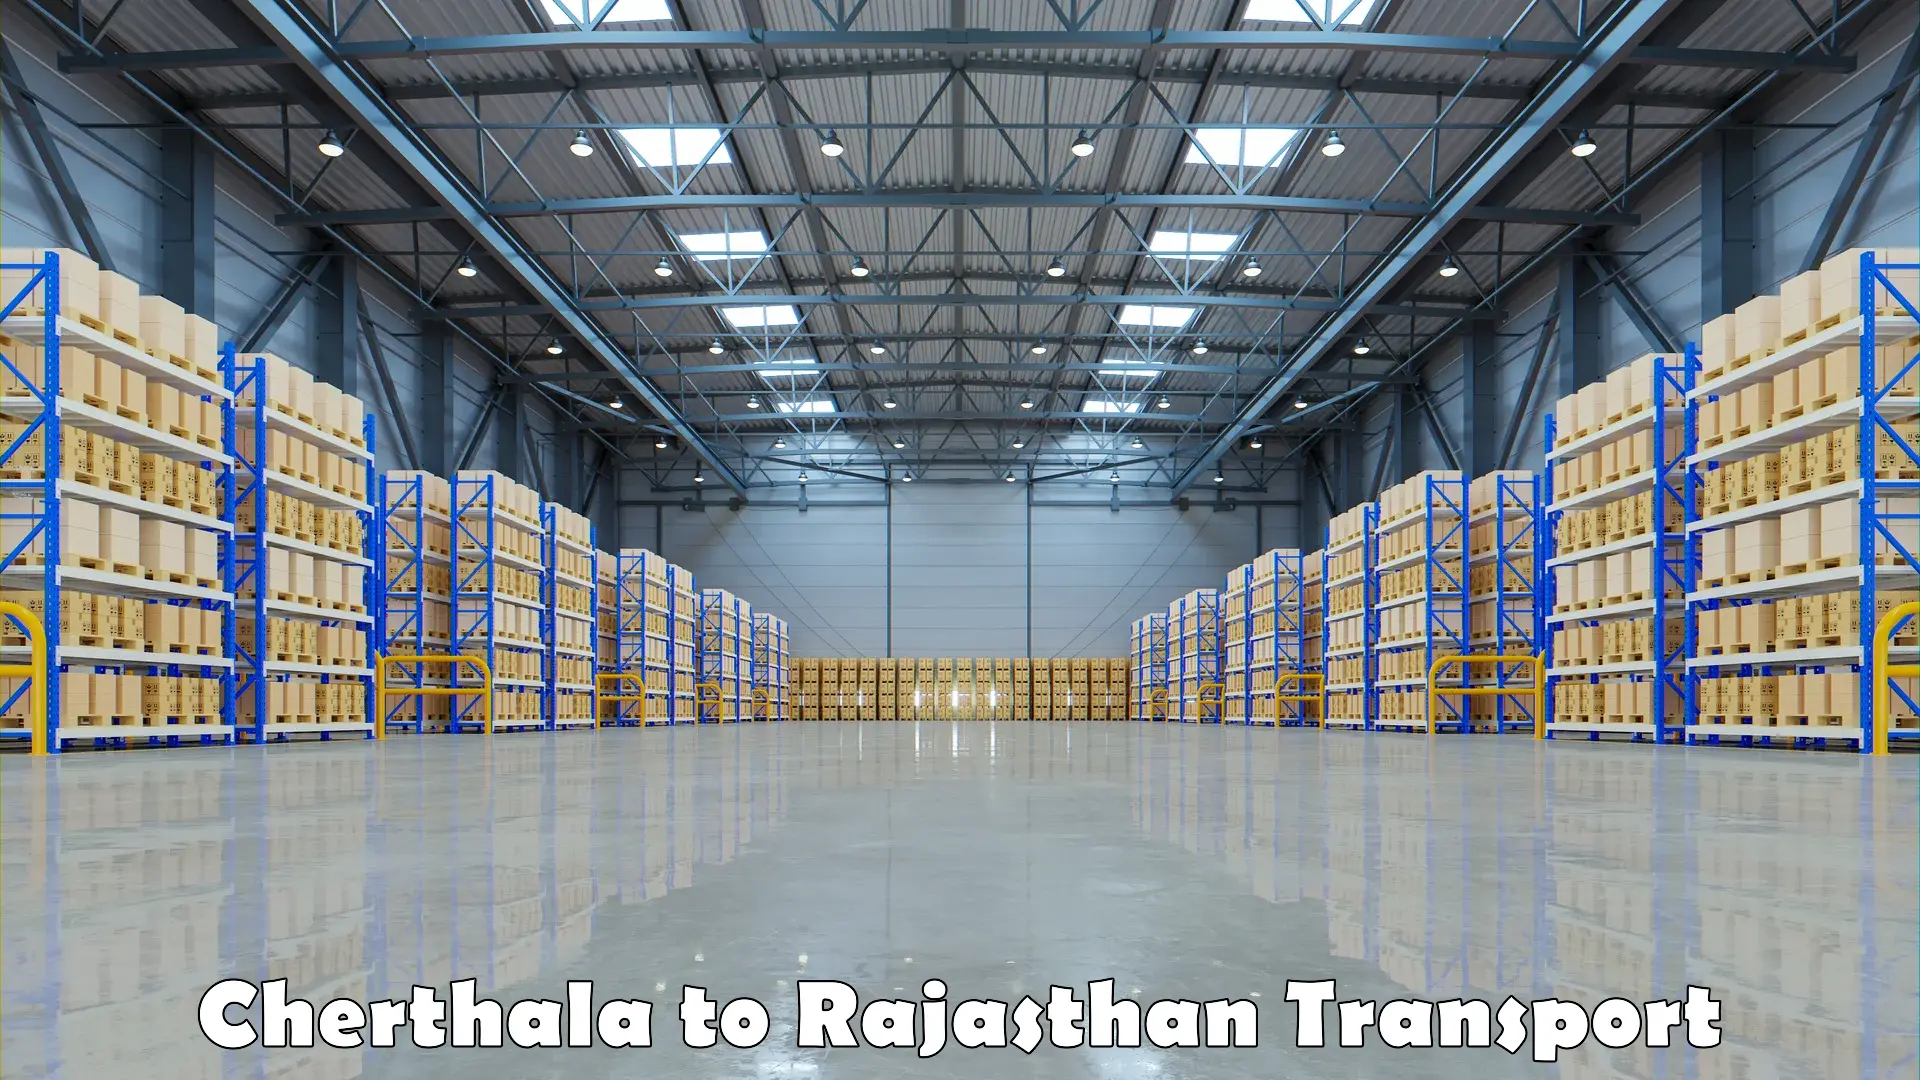 Delivery service Cherthala to Rajasthan